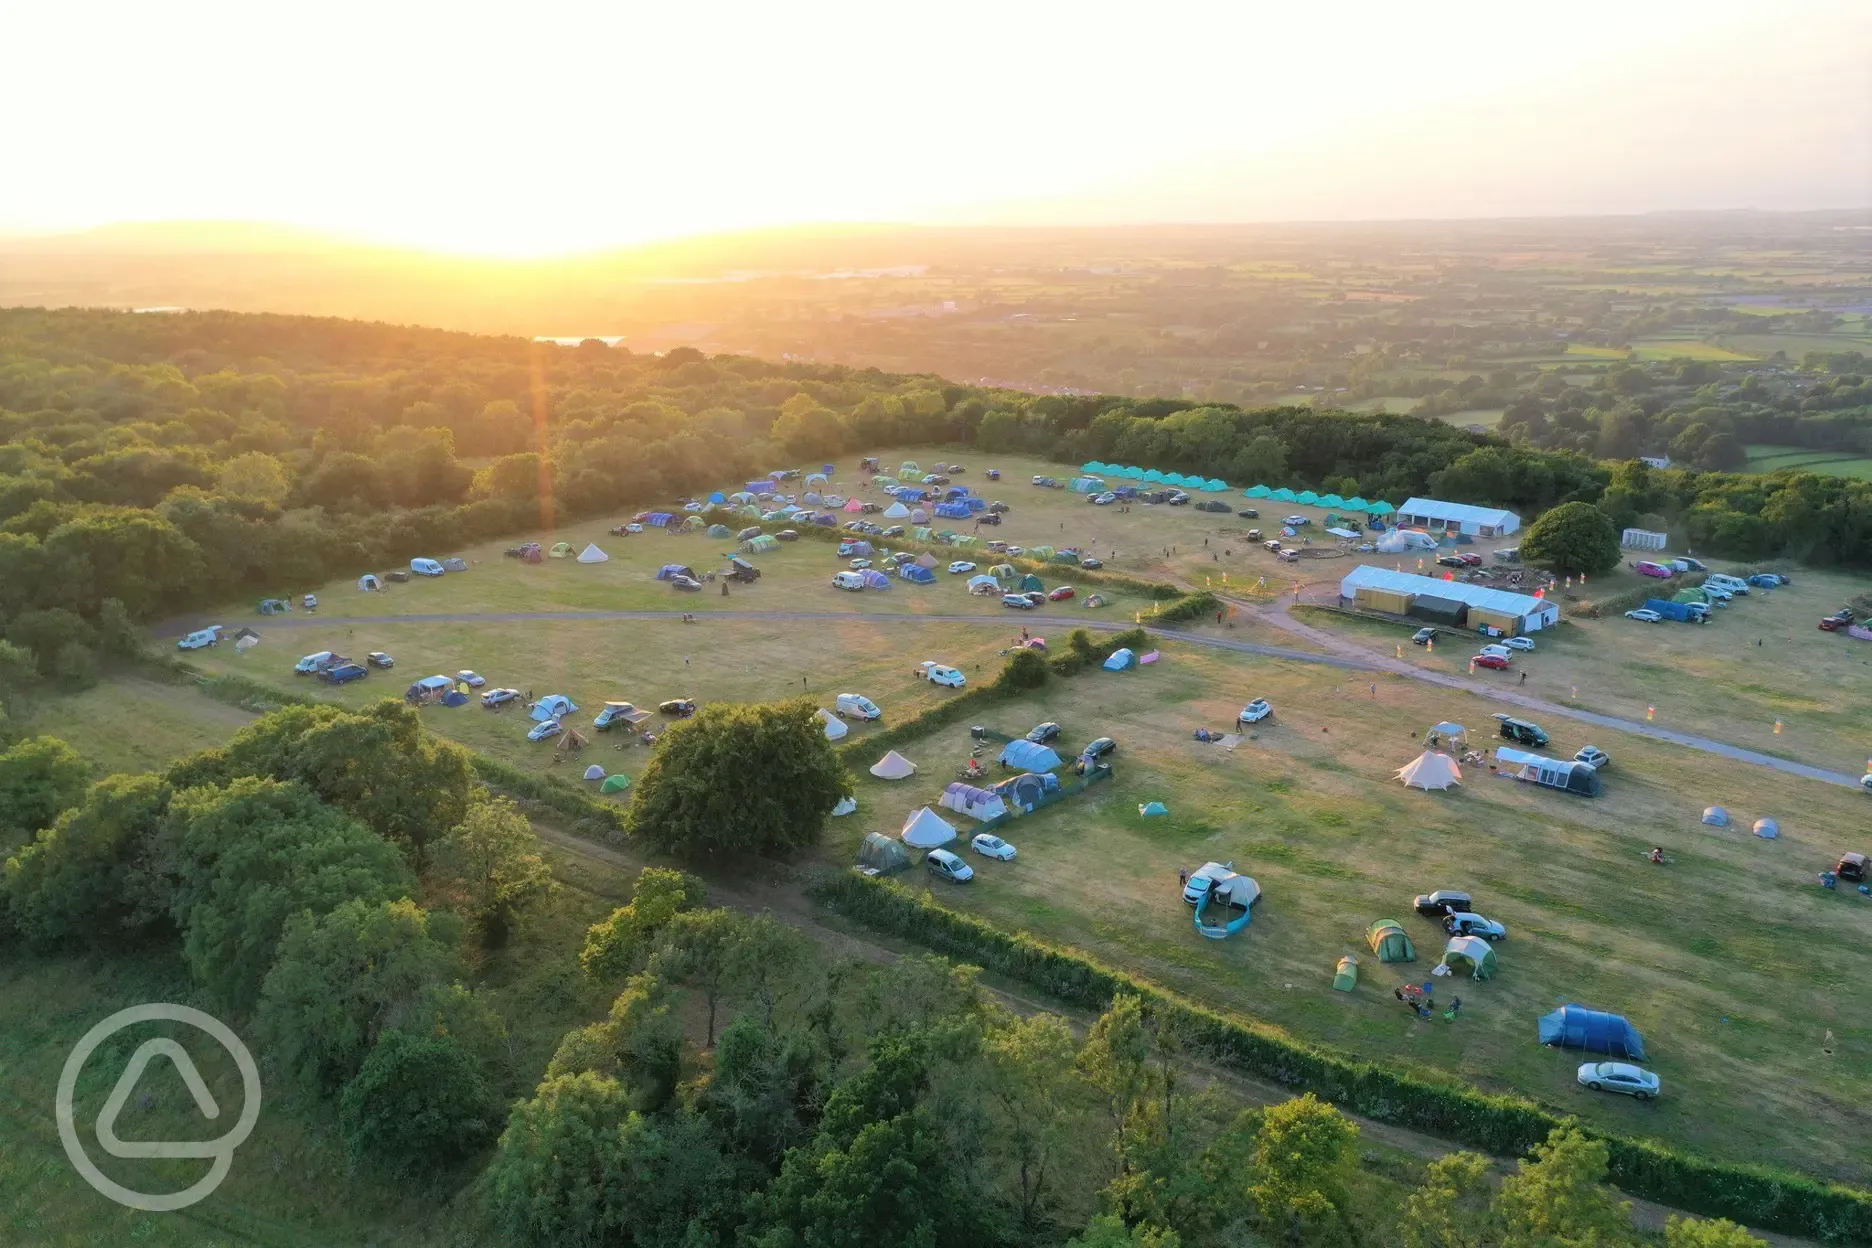 Aerial of the campsite at sunset